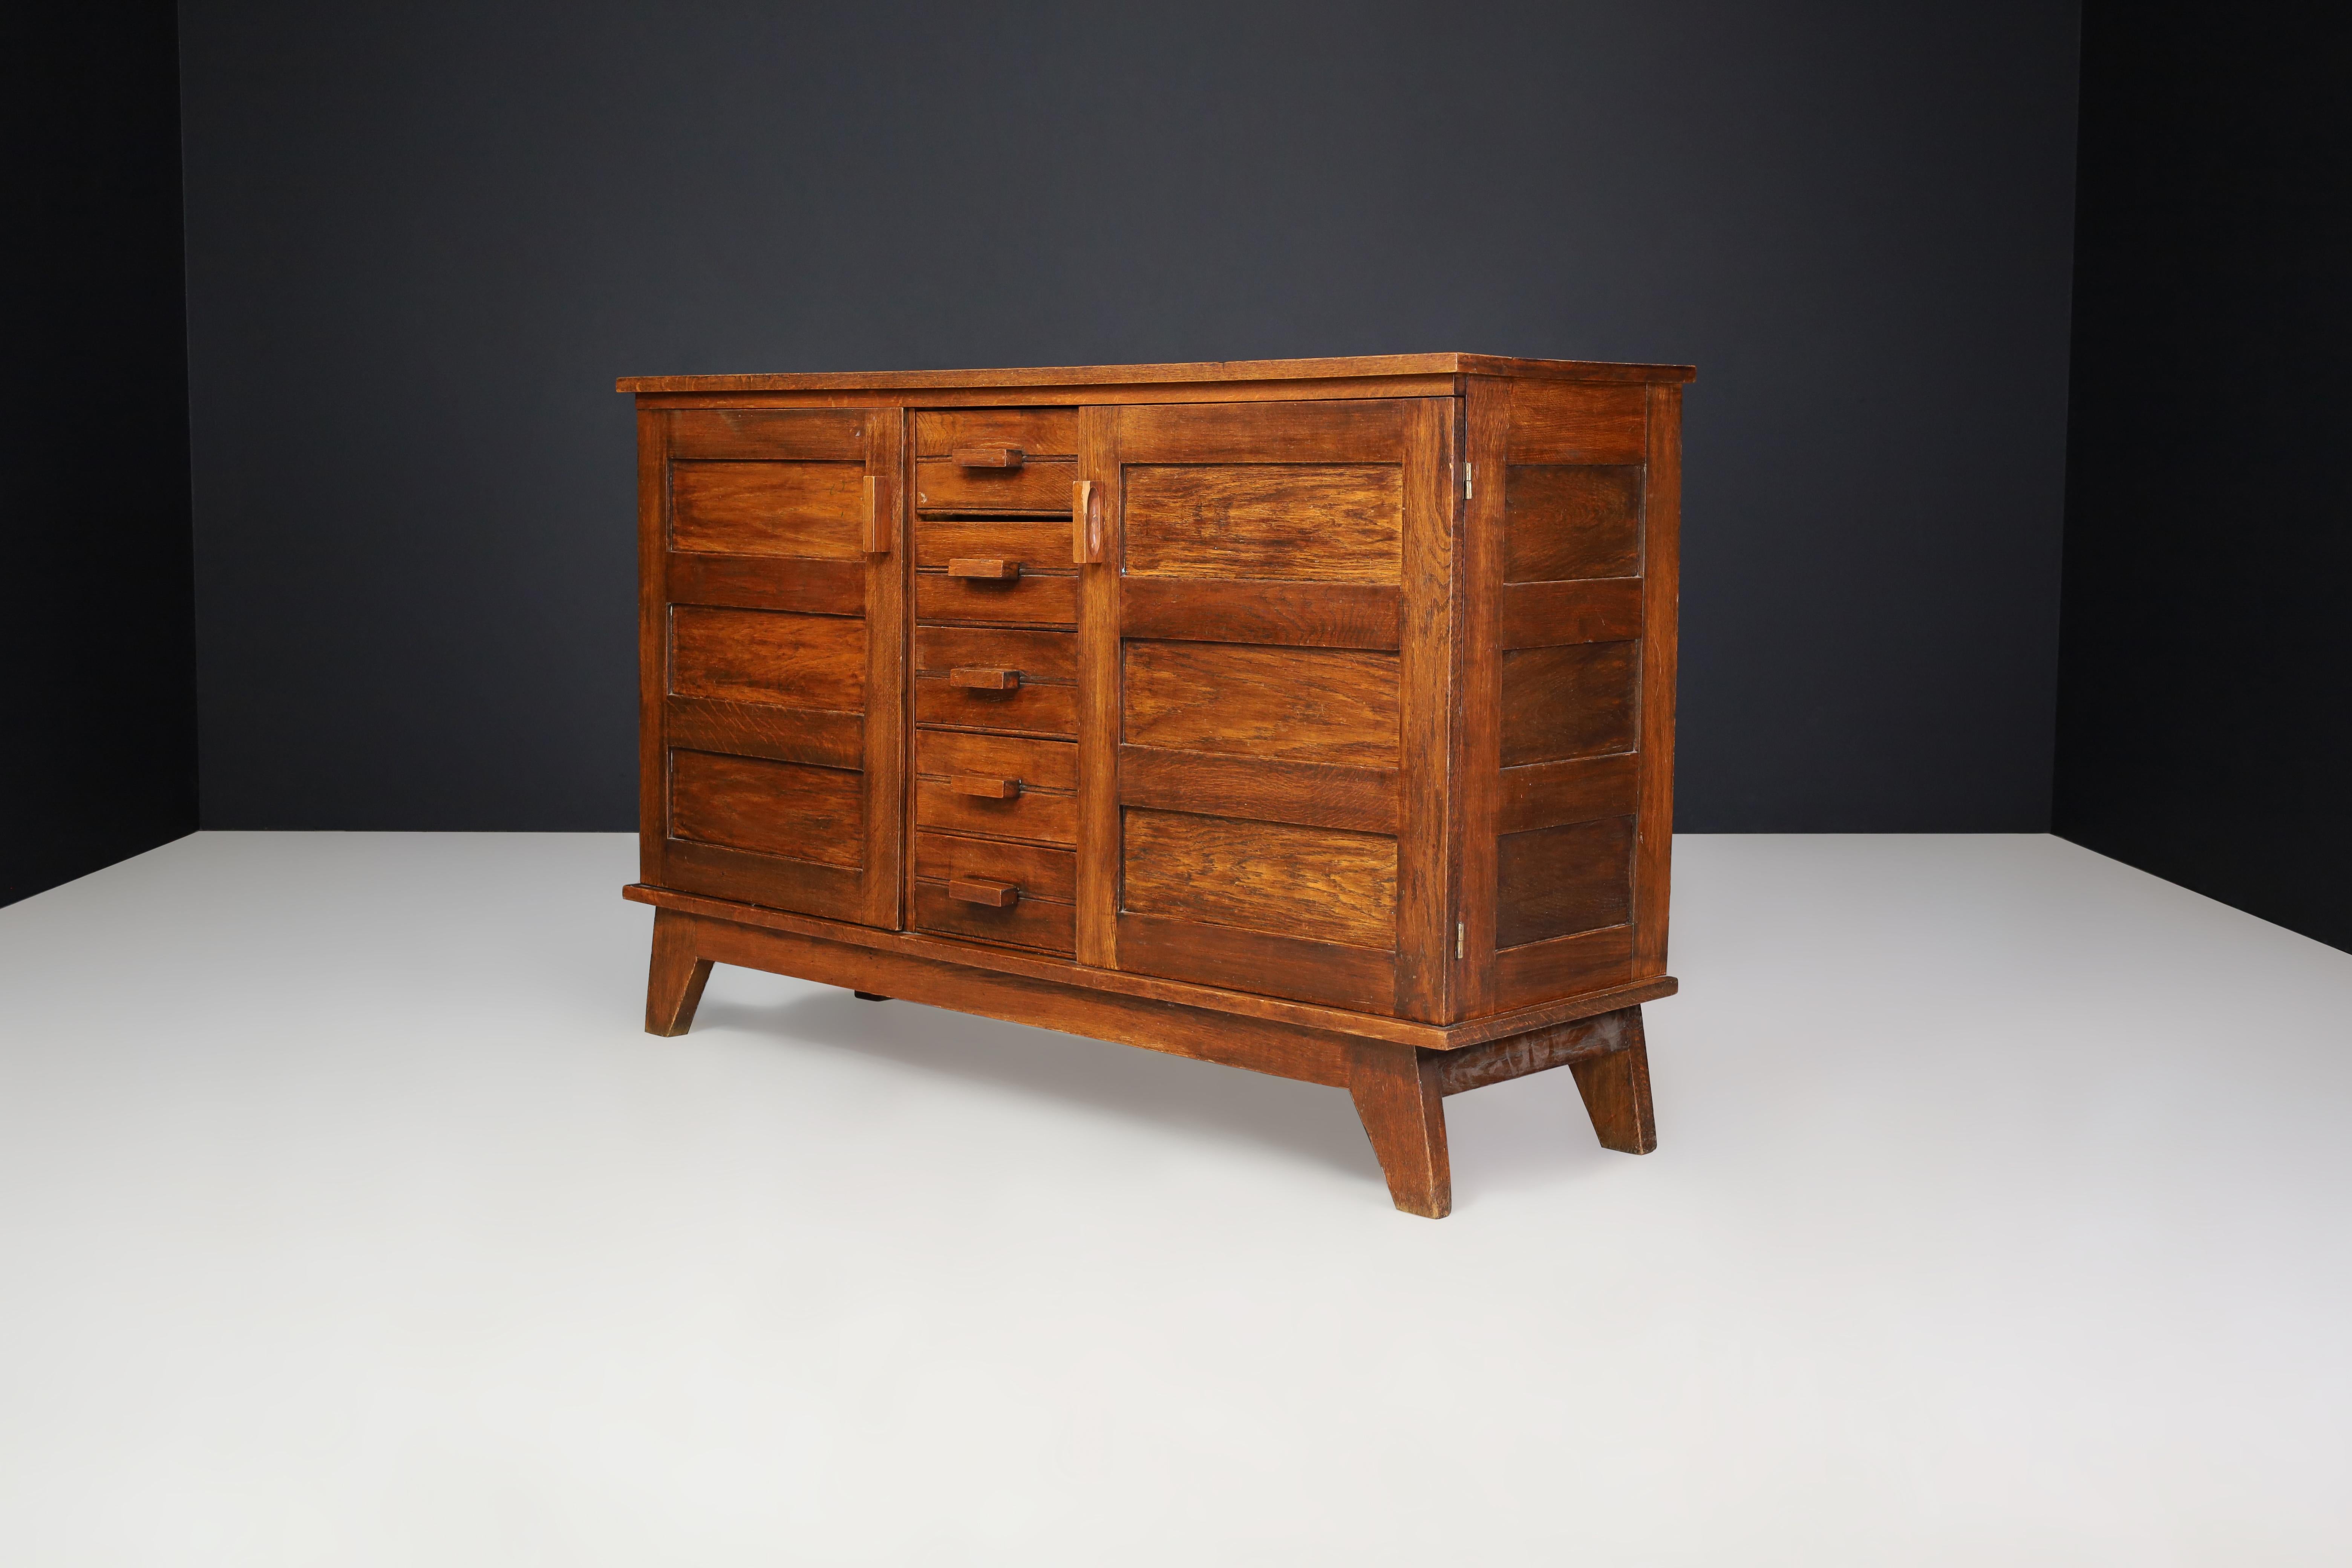 20th Century Midcentury Sideboard in French Oak by René Gabriel, France, 1940s For Sale